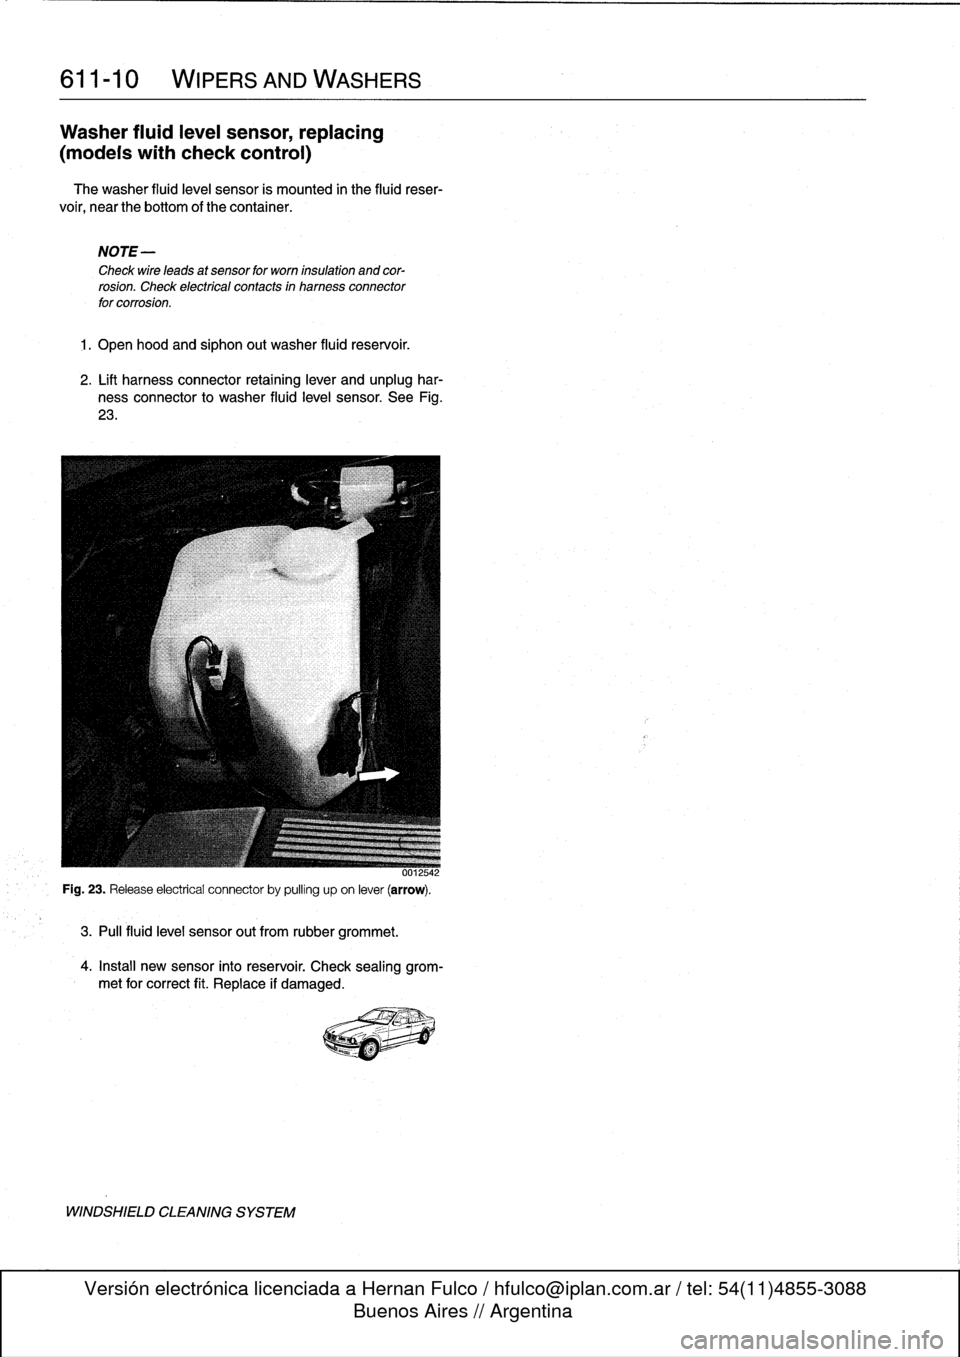 BMW 318i 1998 E36 Workshop Manual 
611-
1
0

	

WIPERS
AND
WASHERS

Washer
fluidleve¡
sensor,
replacing

(modeis
with
check
control)

The
washer
fluid
level
sensor
is
mounted
in
the
fluid
reser-

voir,
near
the
bottom
of
thecontainer